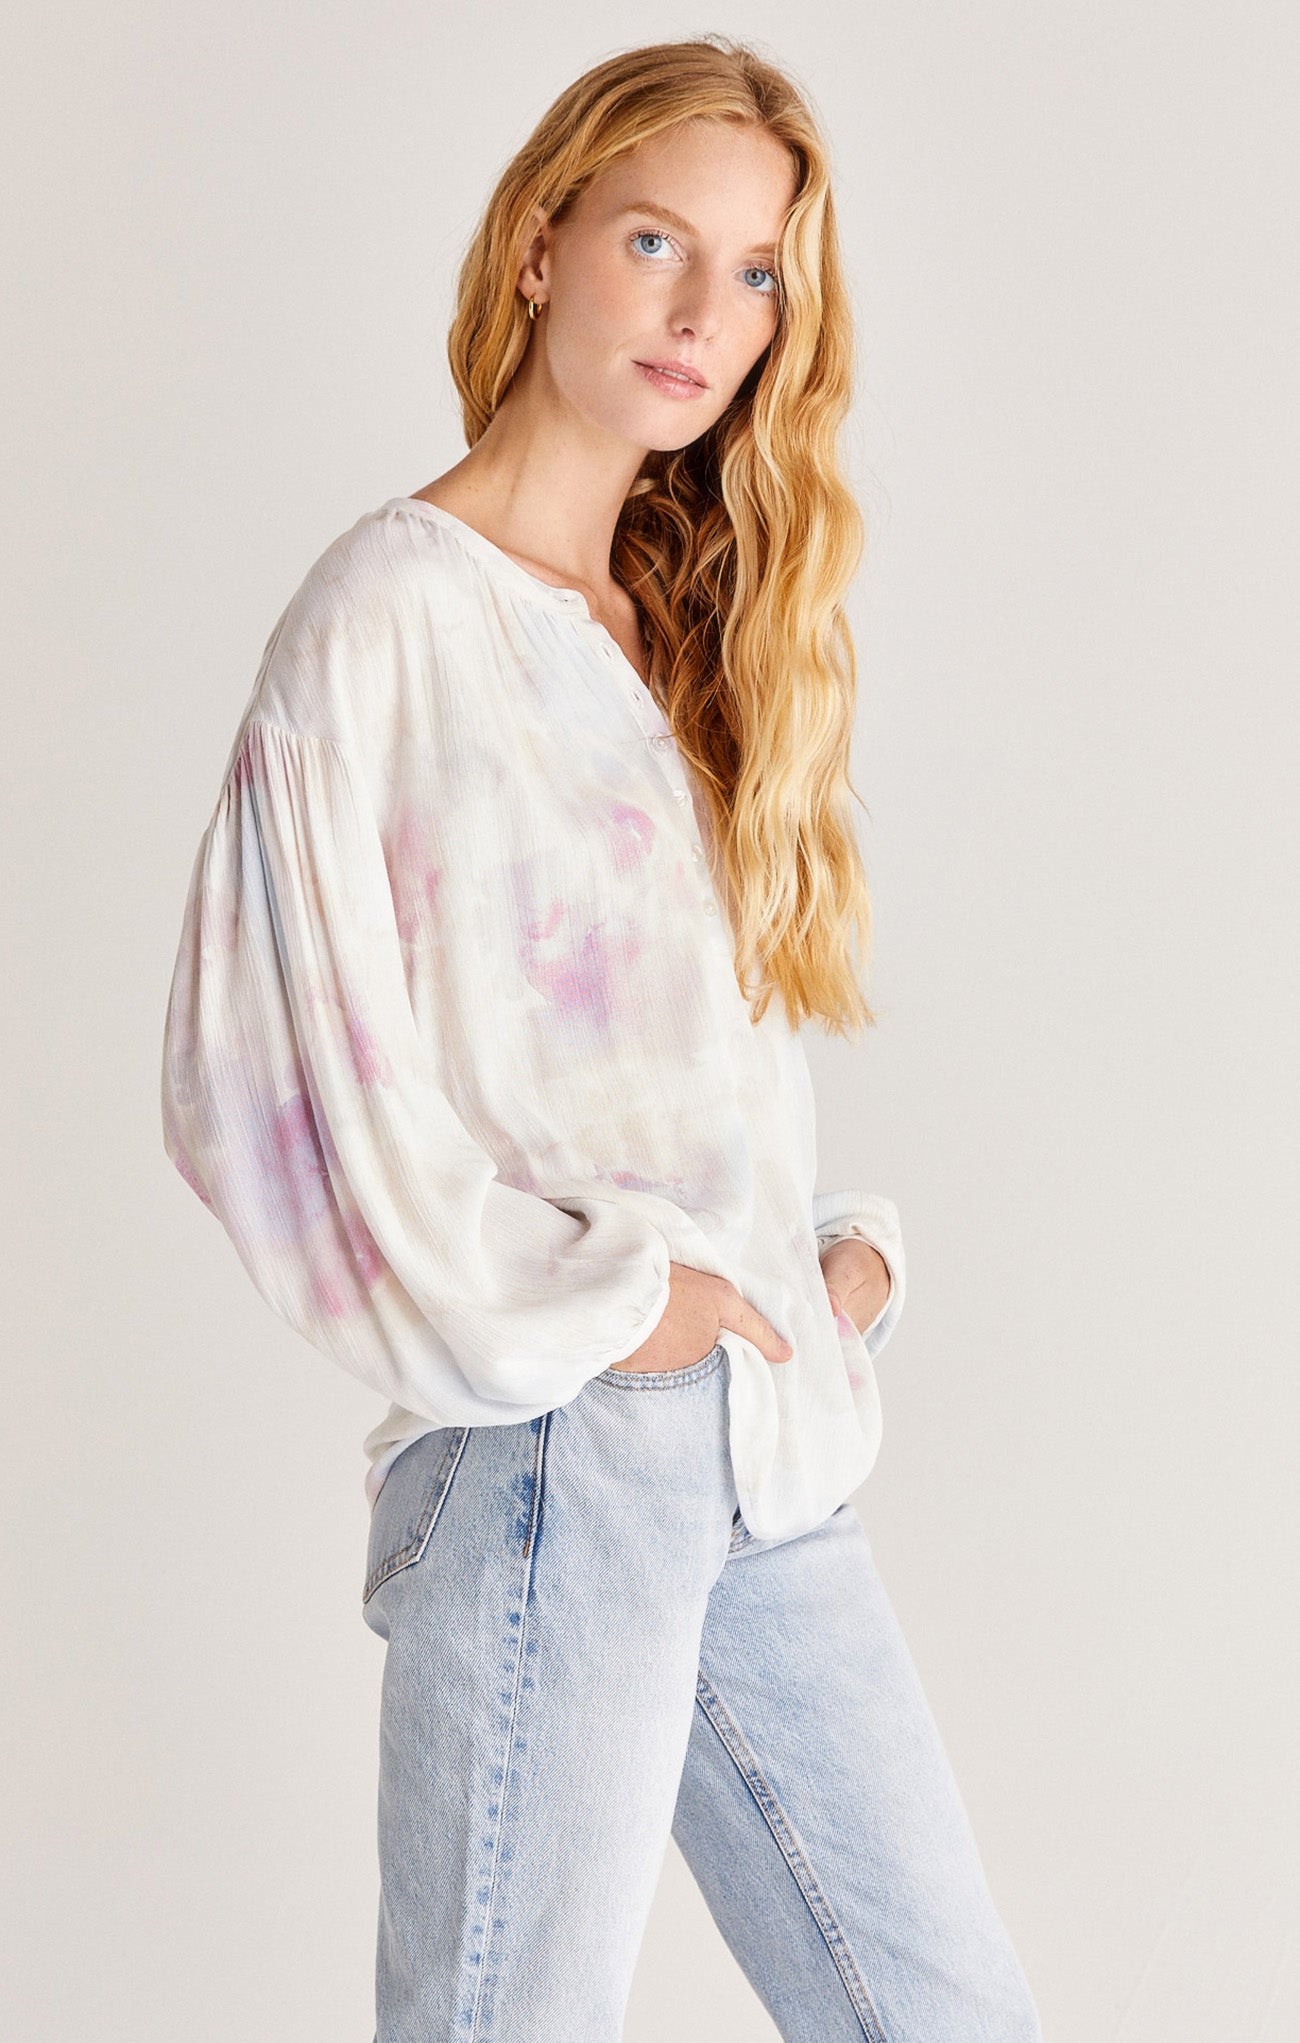 Bayfront Blurred Woven Top - Multi